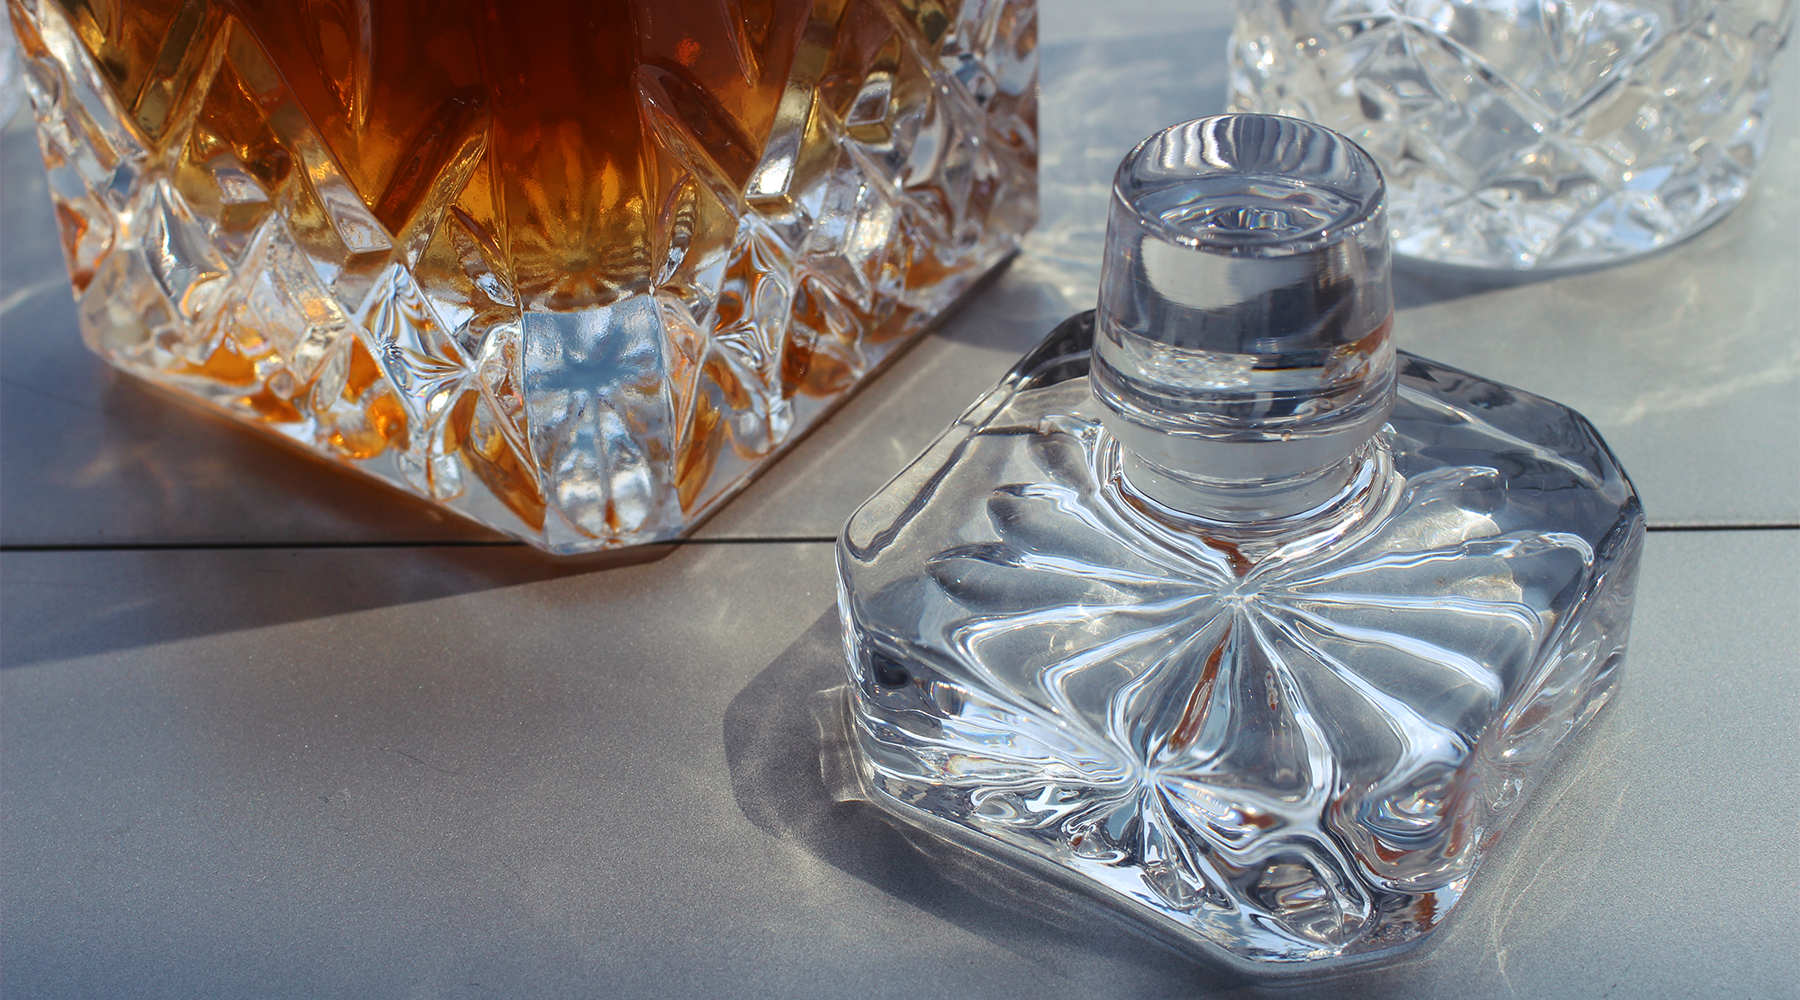 Vintorio GoodGlassware Whiskey Decanter Set - Your guests will appreciate the details